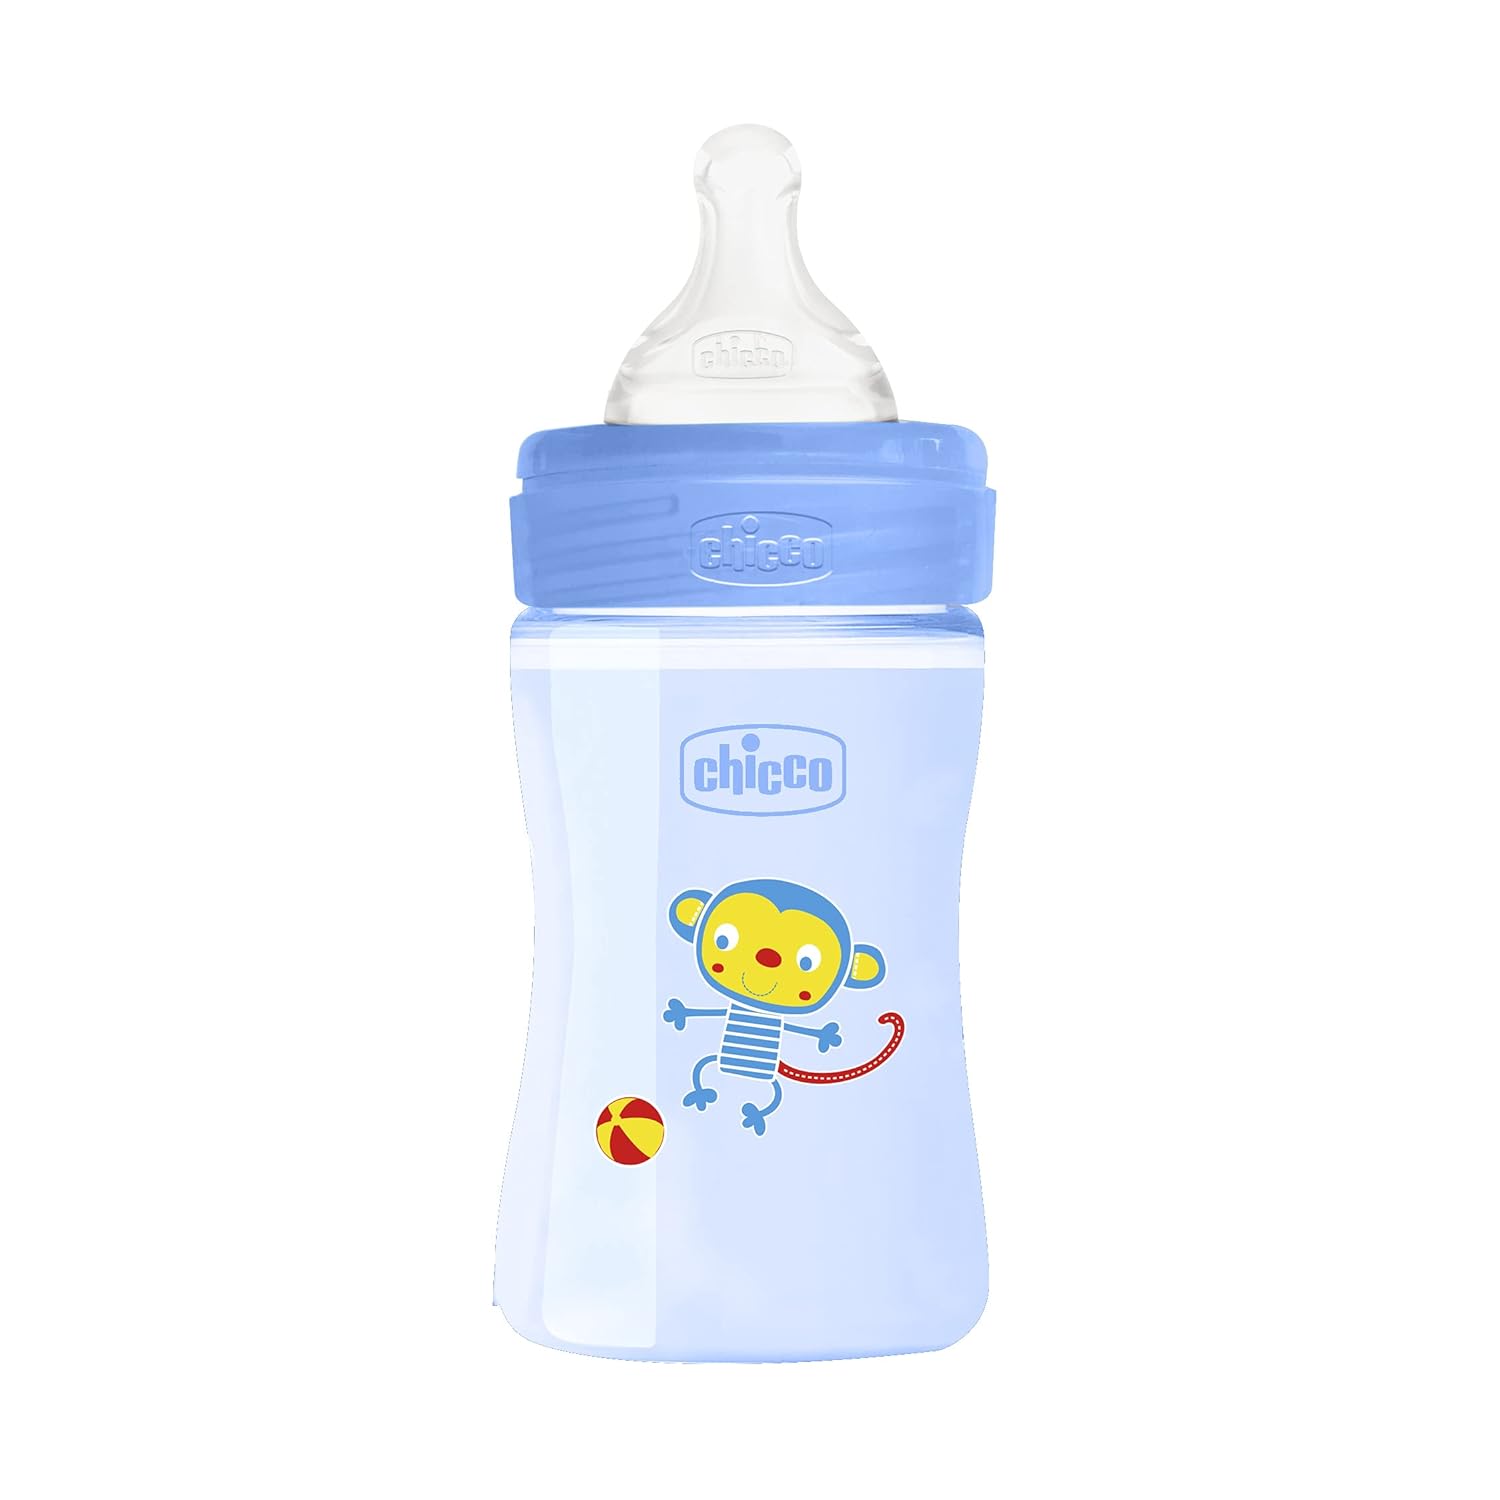 CChicco Well-Being  Baby Coloured Feeding Bottle, Advanced Anti-Colic System, BPA Free, Hygienic Silicone Teat, Milk Bottle for Babies & Toddlers (Blue)